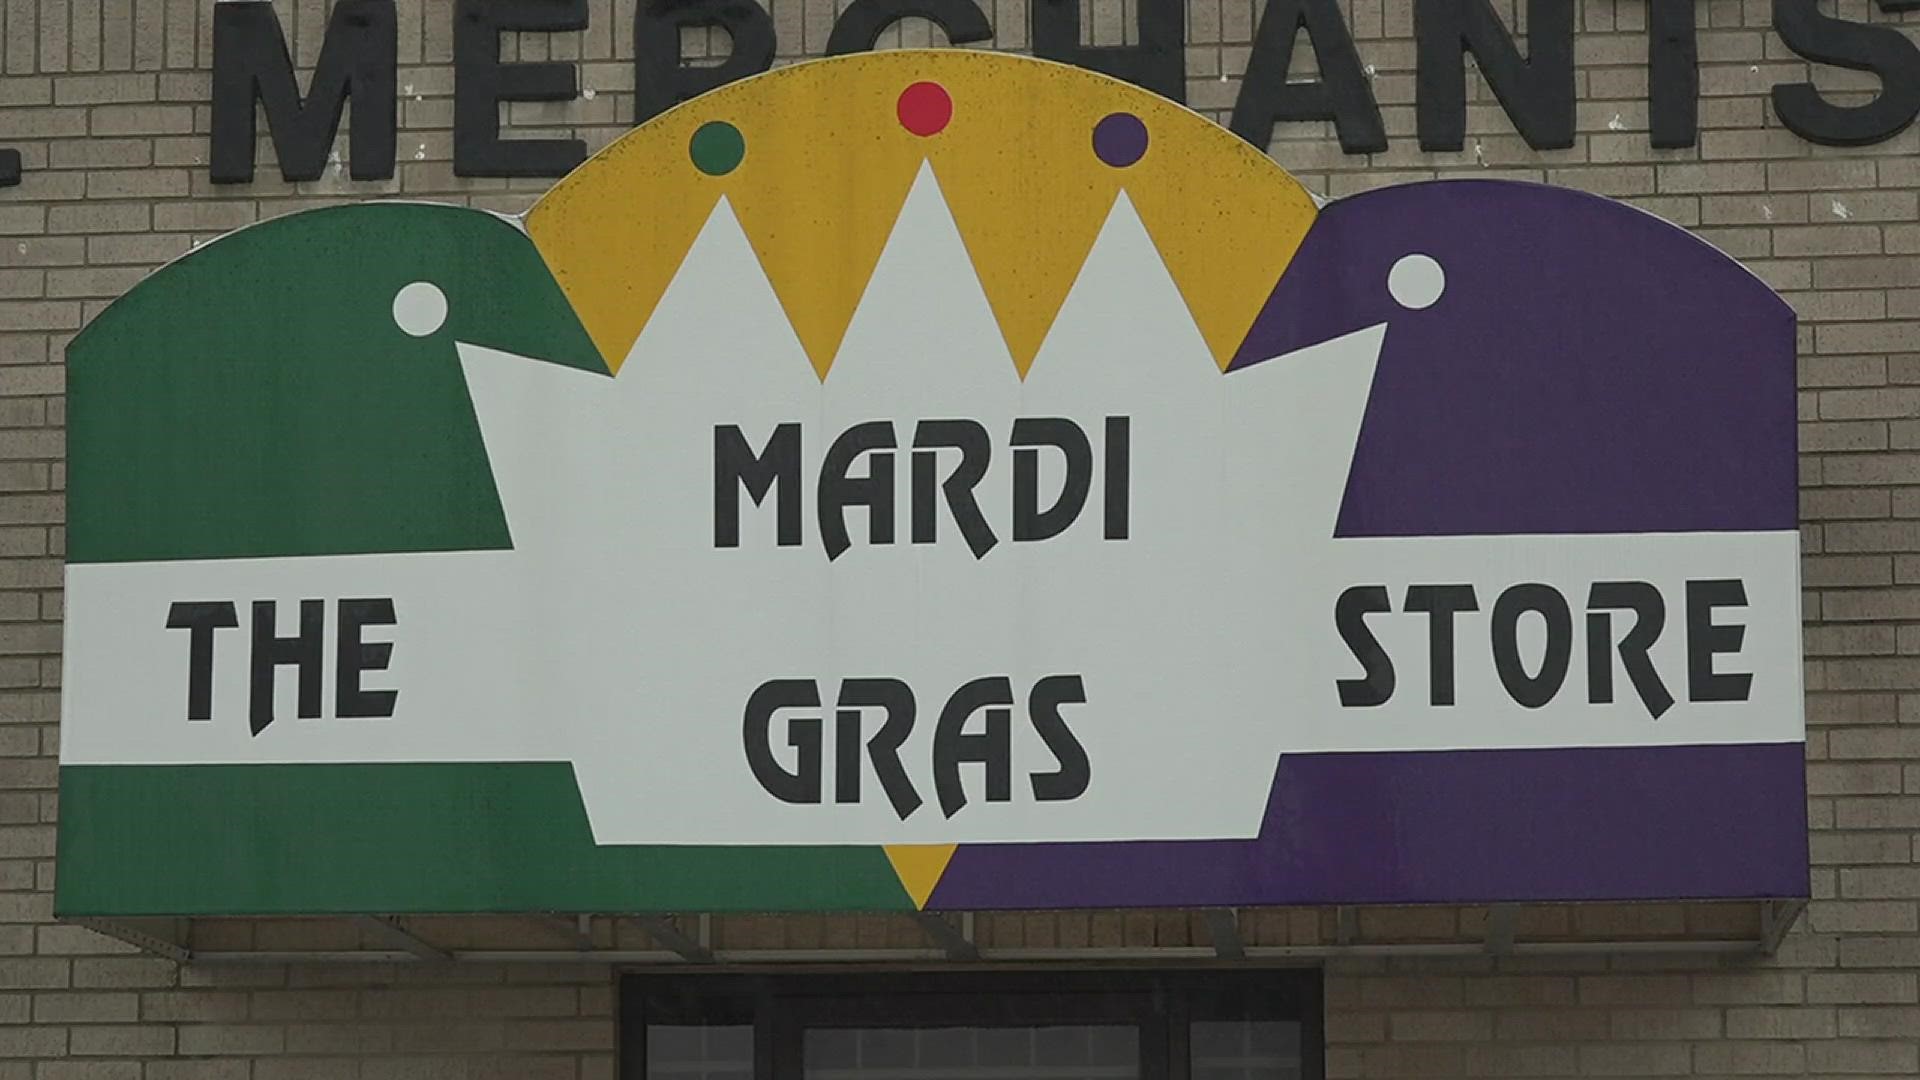 Beaumont residents are less than a month away from celebrating Mardi Gras Southeast Texas and many are counting down the days until the big celebration.